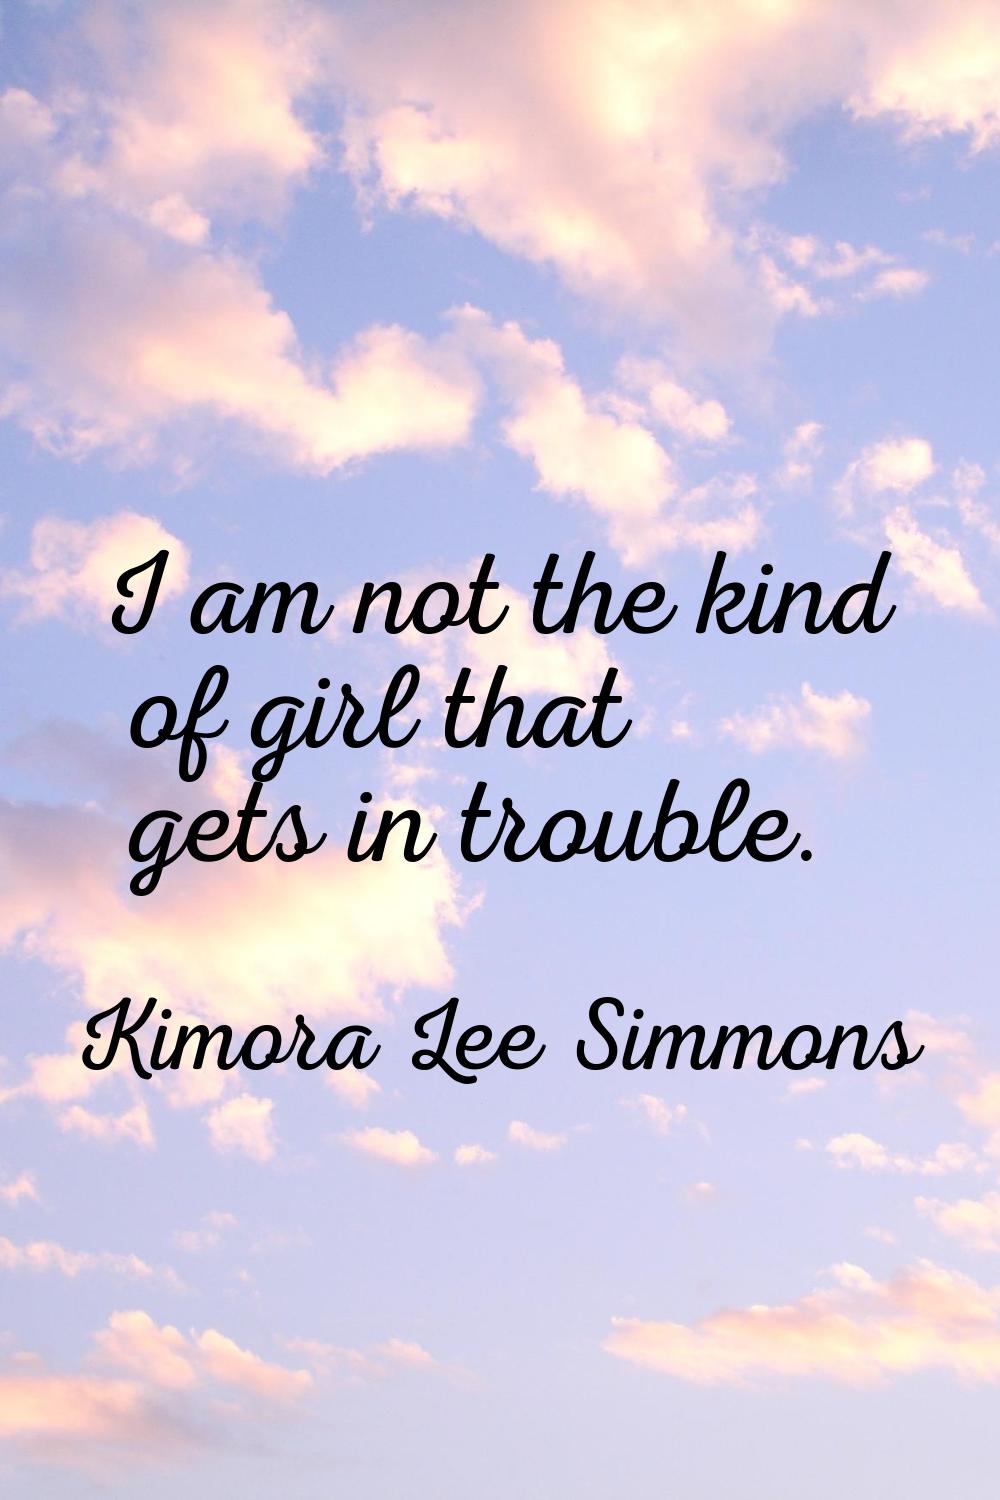 I am not the kind of girl that gets in trouble.